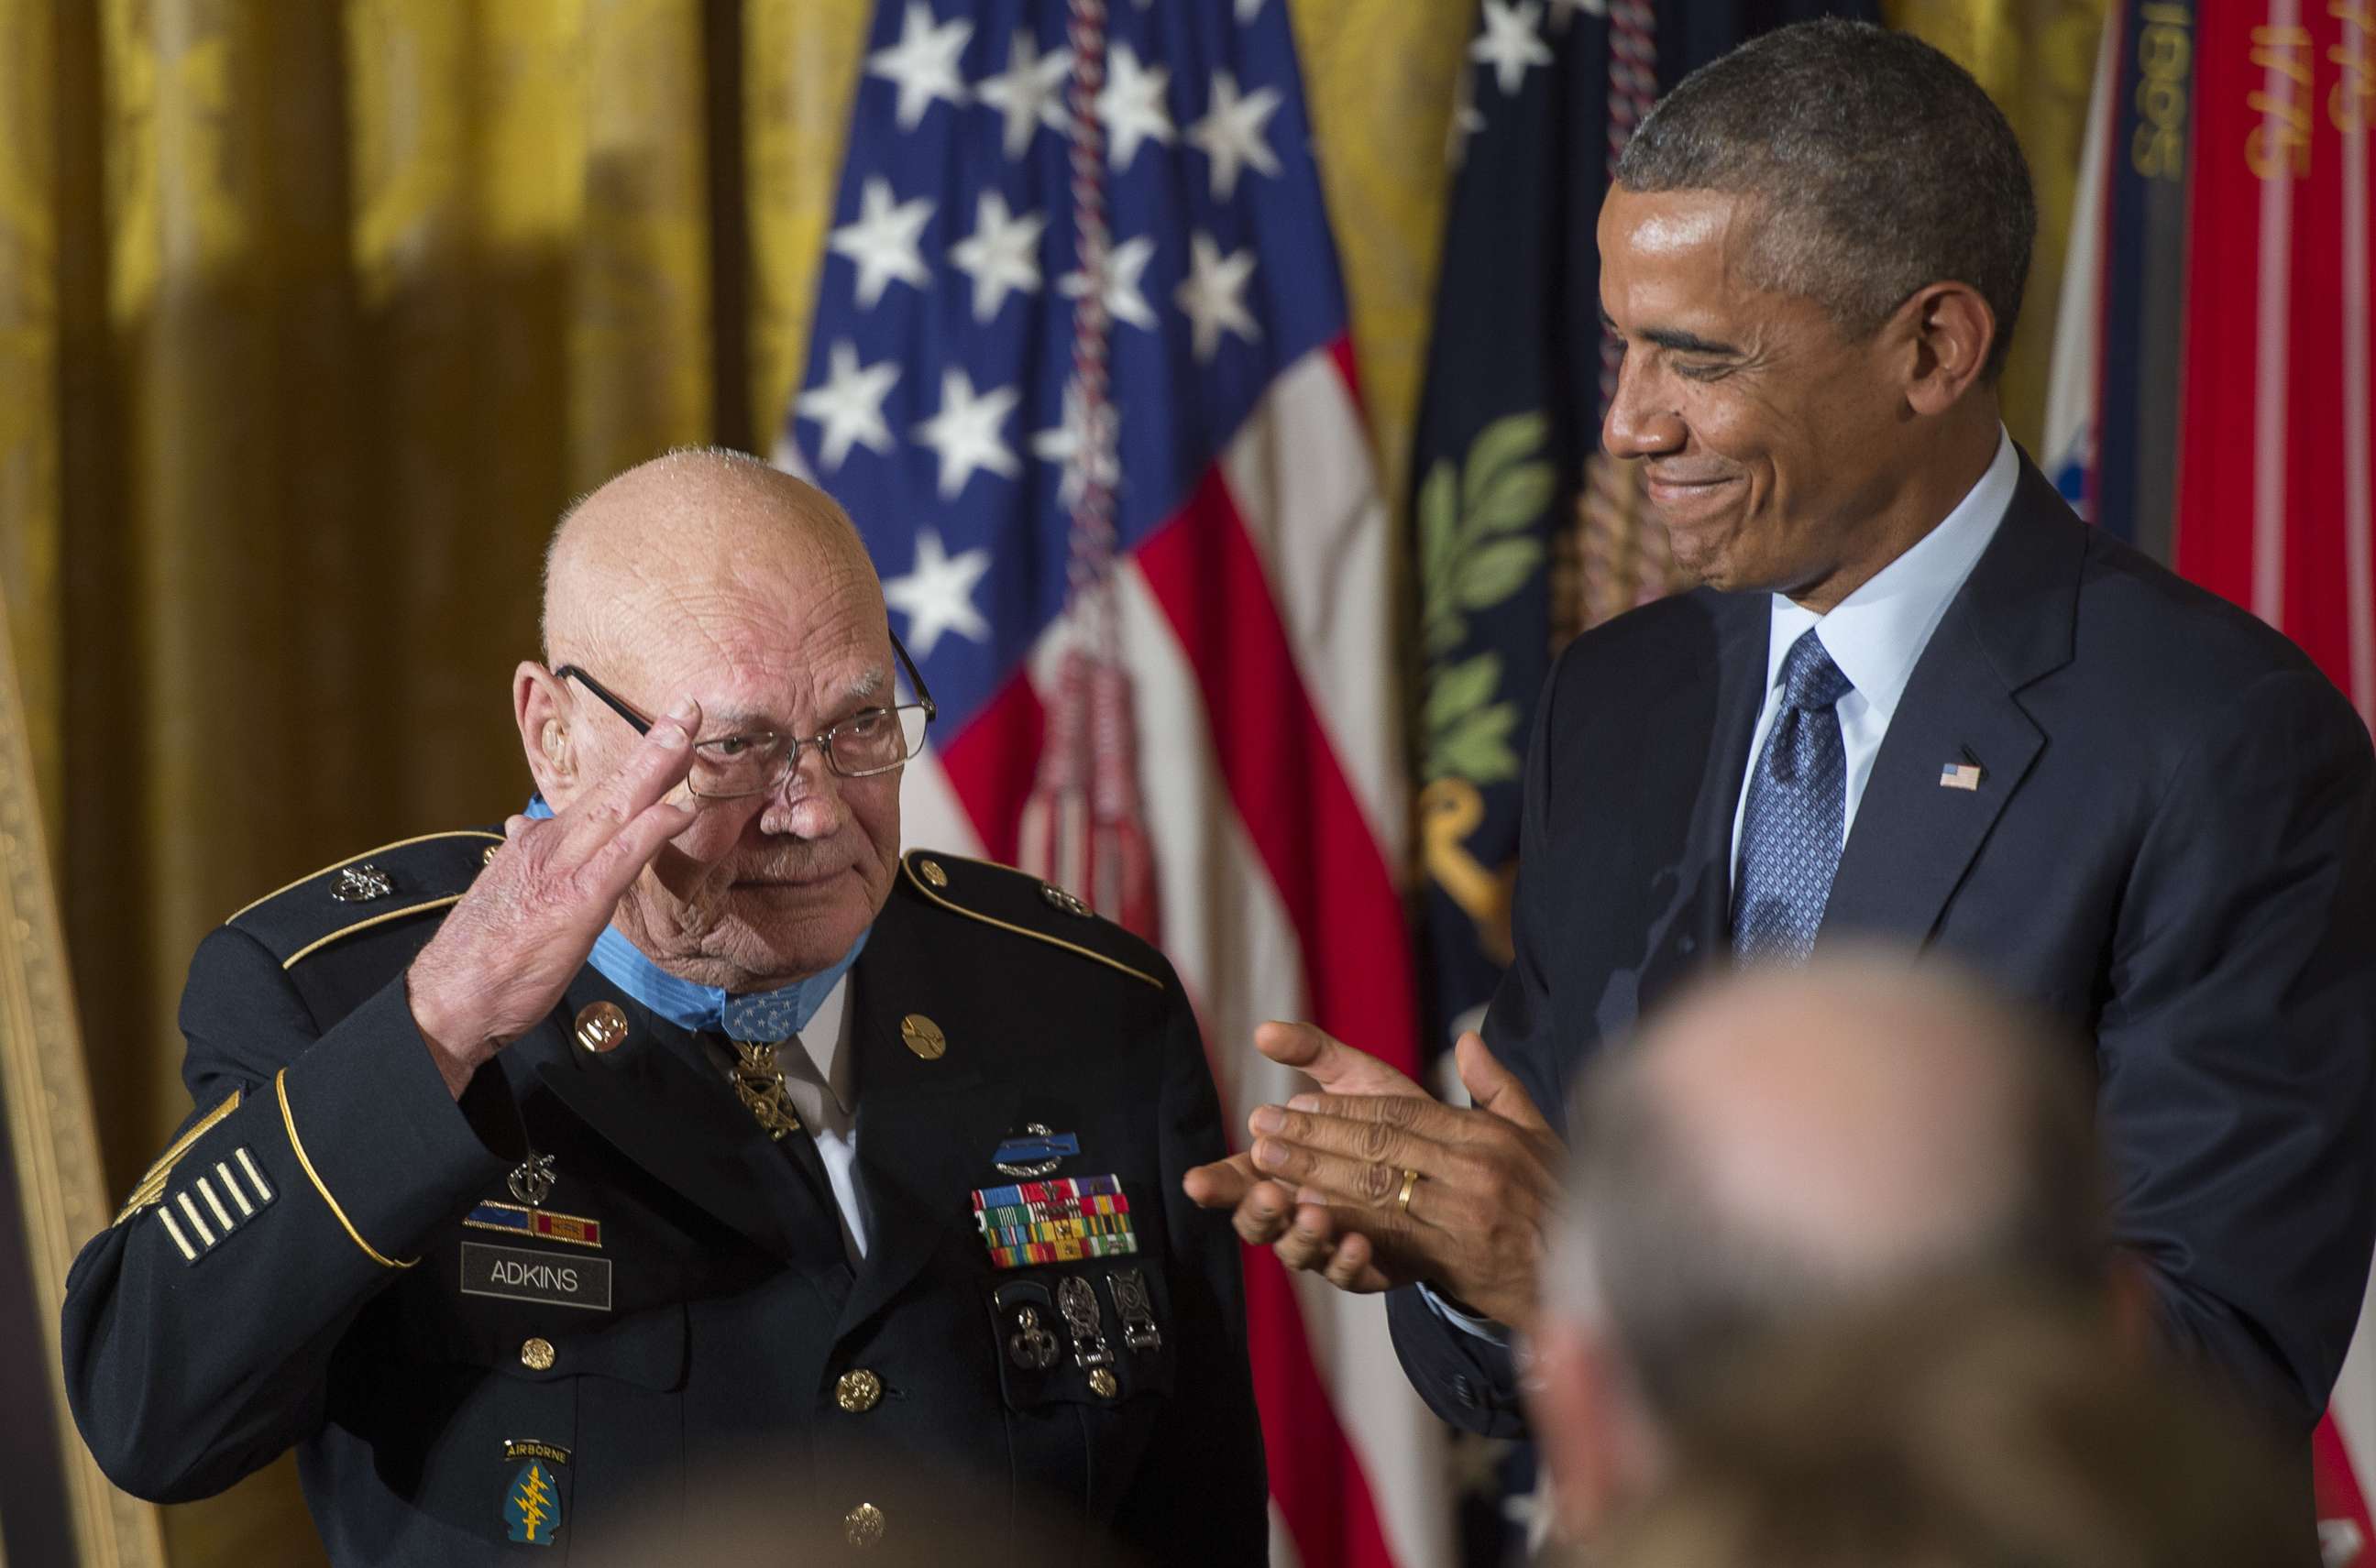 PHOTO: U.S. Army Command Sergeant Major Bennie Adkins salutes after being awarded the Medal of Honor by President Barack Obama during a ceremony at the White House in Washington, Sept. 15, 2014. 